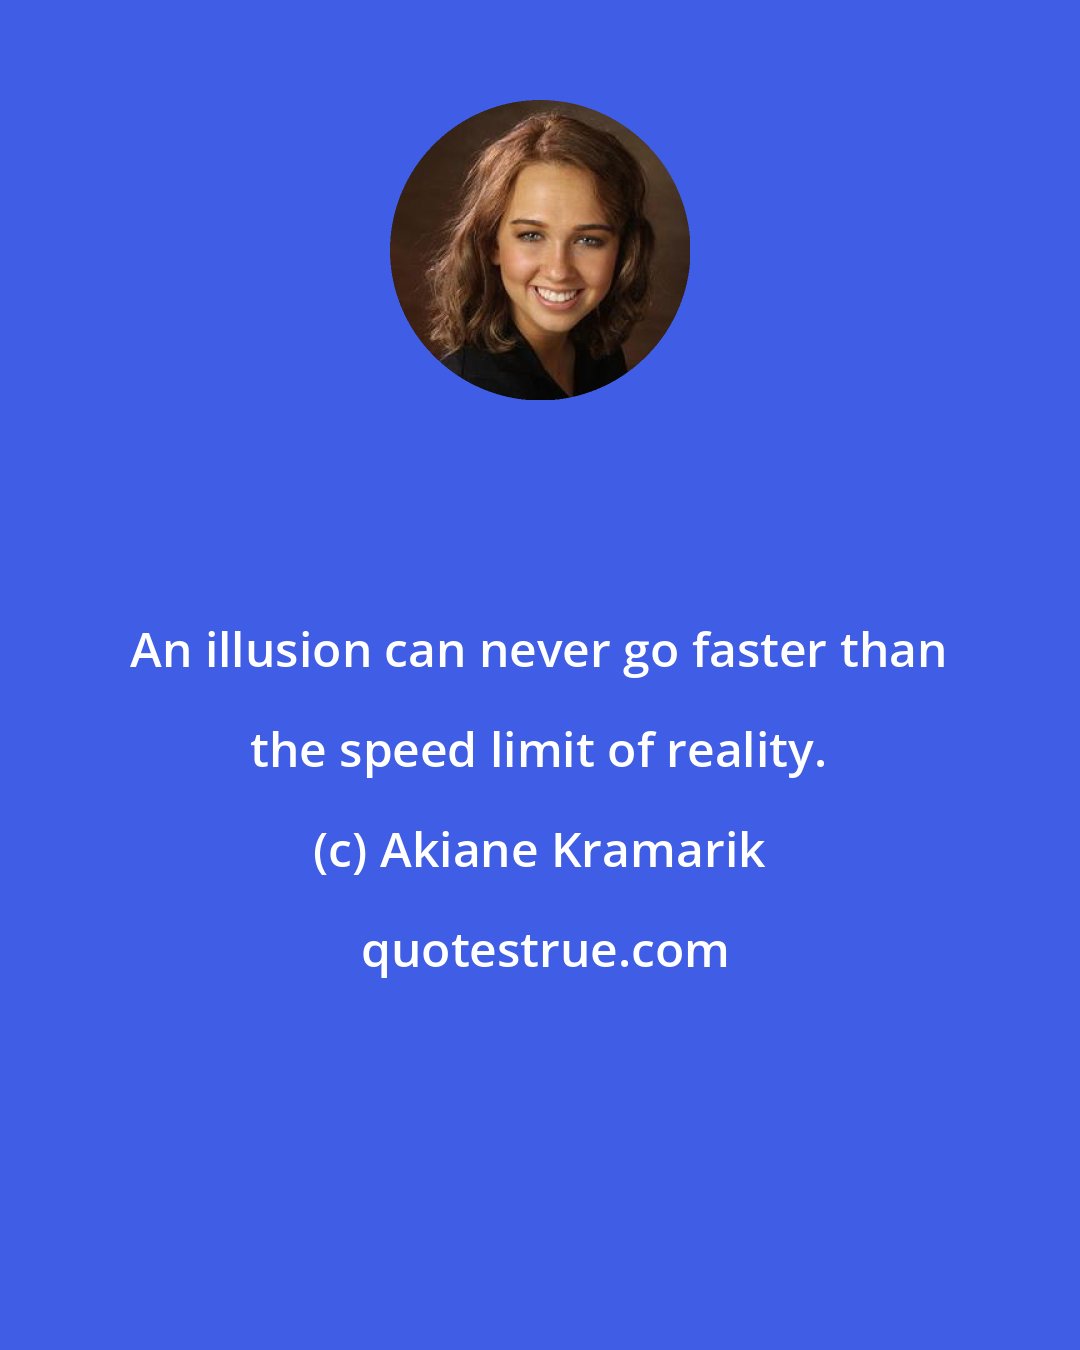 Akiane Kramarik: An illusion can never go faster than the speed limit of reality.